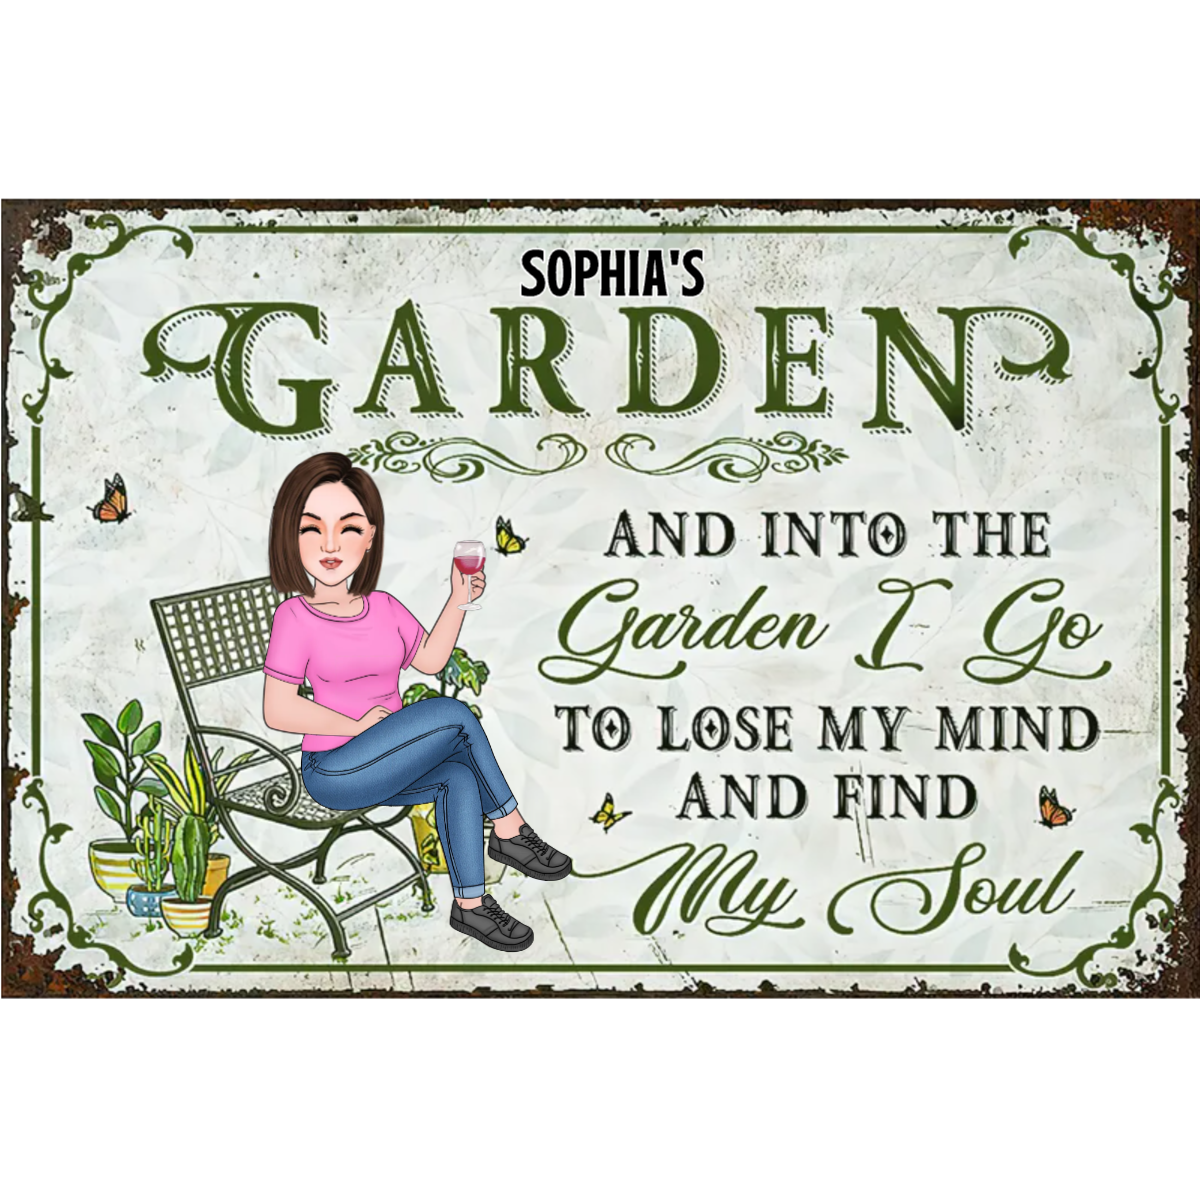 Into the Garden II go to lose my mind & find my spirit| Personalized Classic Metal Sign, White